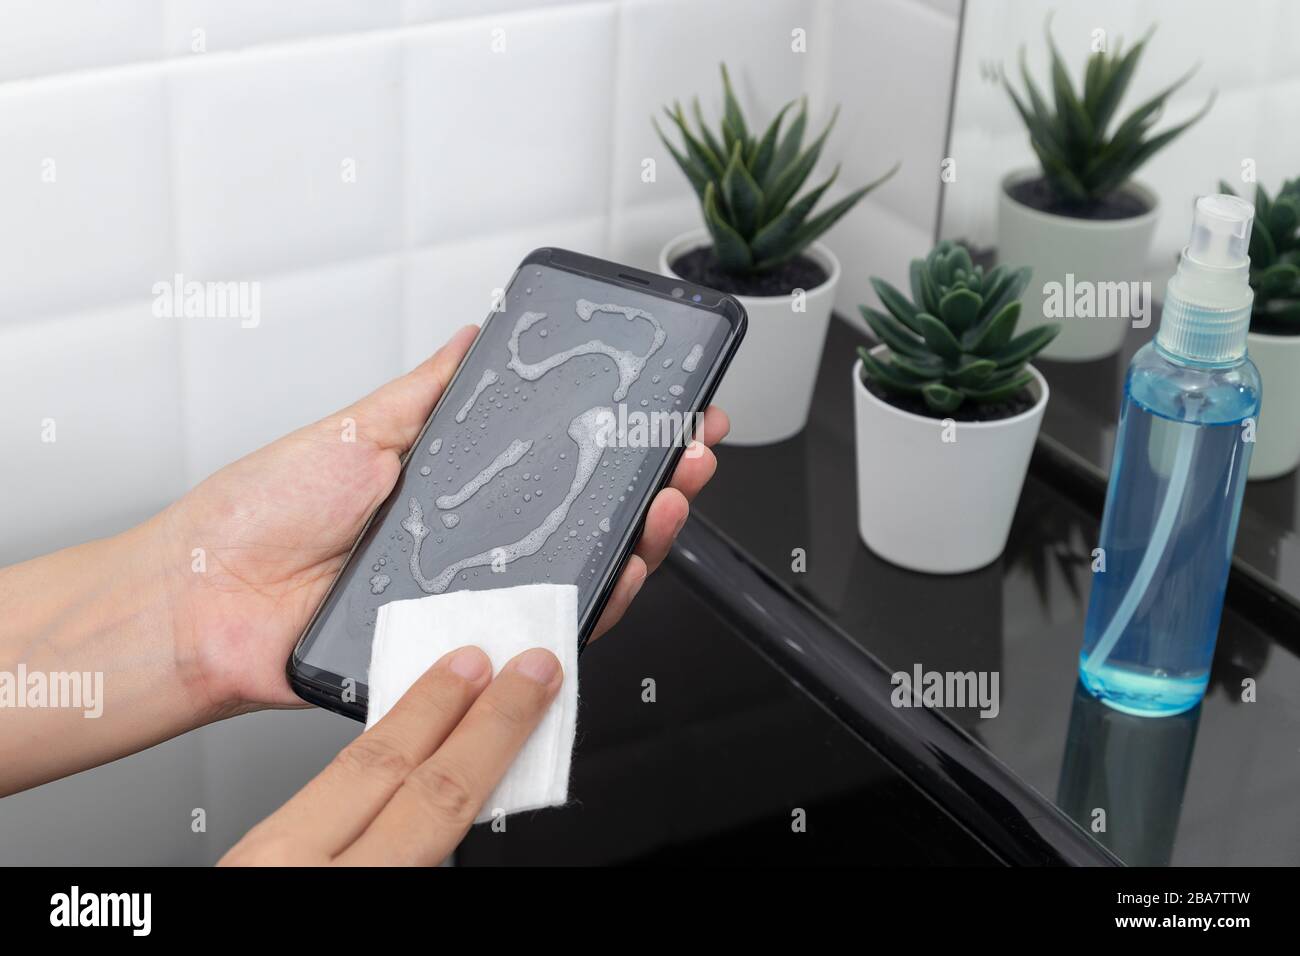 disinfect, sanitize, hygiene care. cleaning dirty stain on mobile phone touch screen for disinfection, prevention of germs spreading during infections Stock Photo